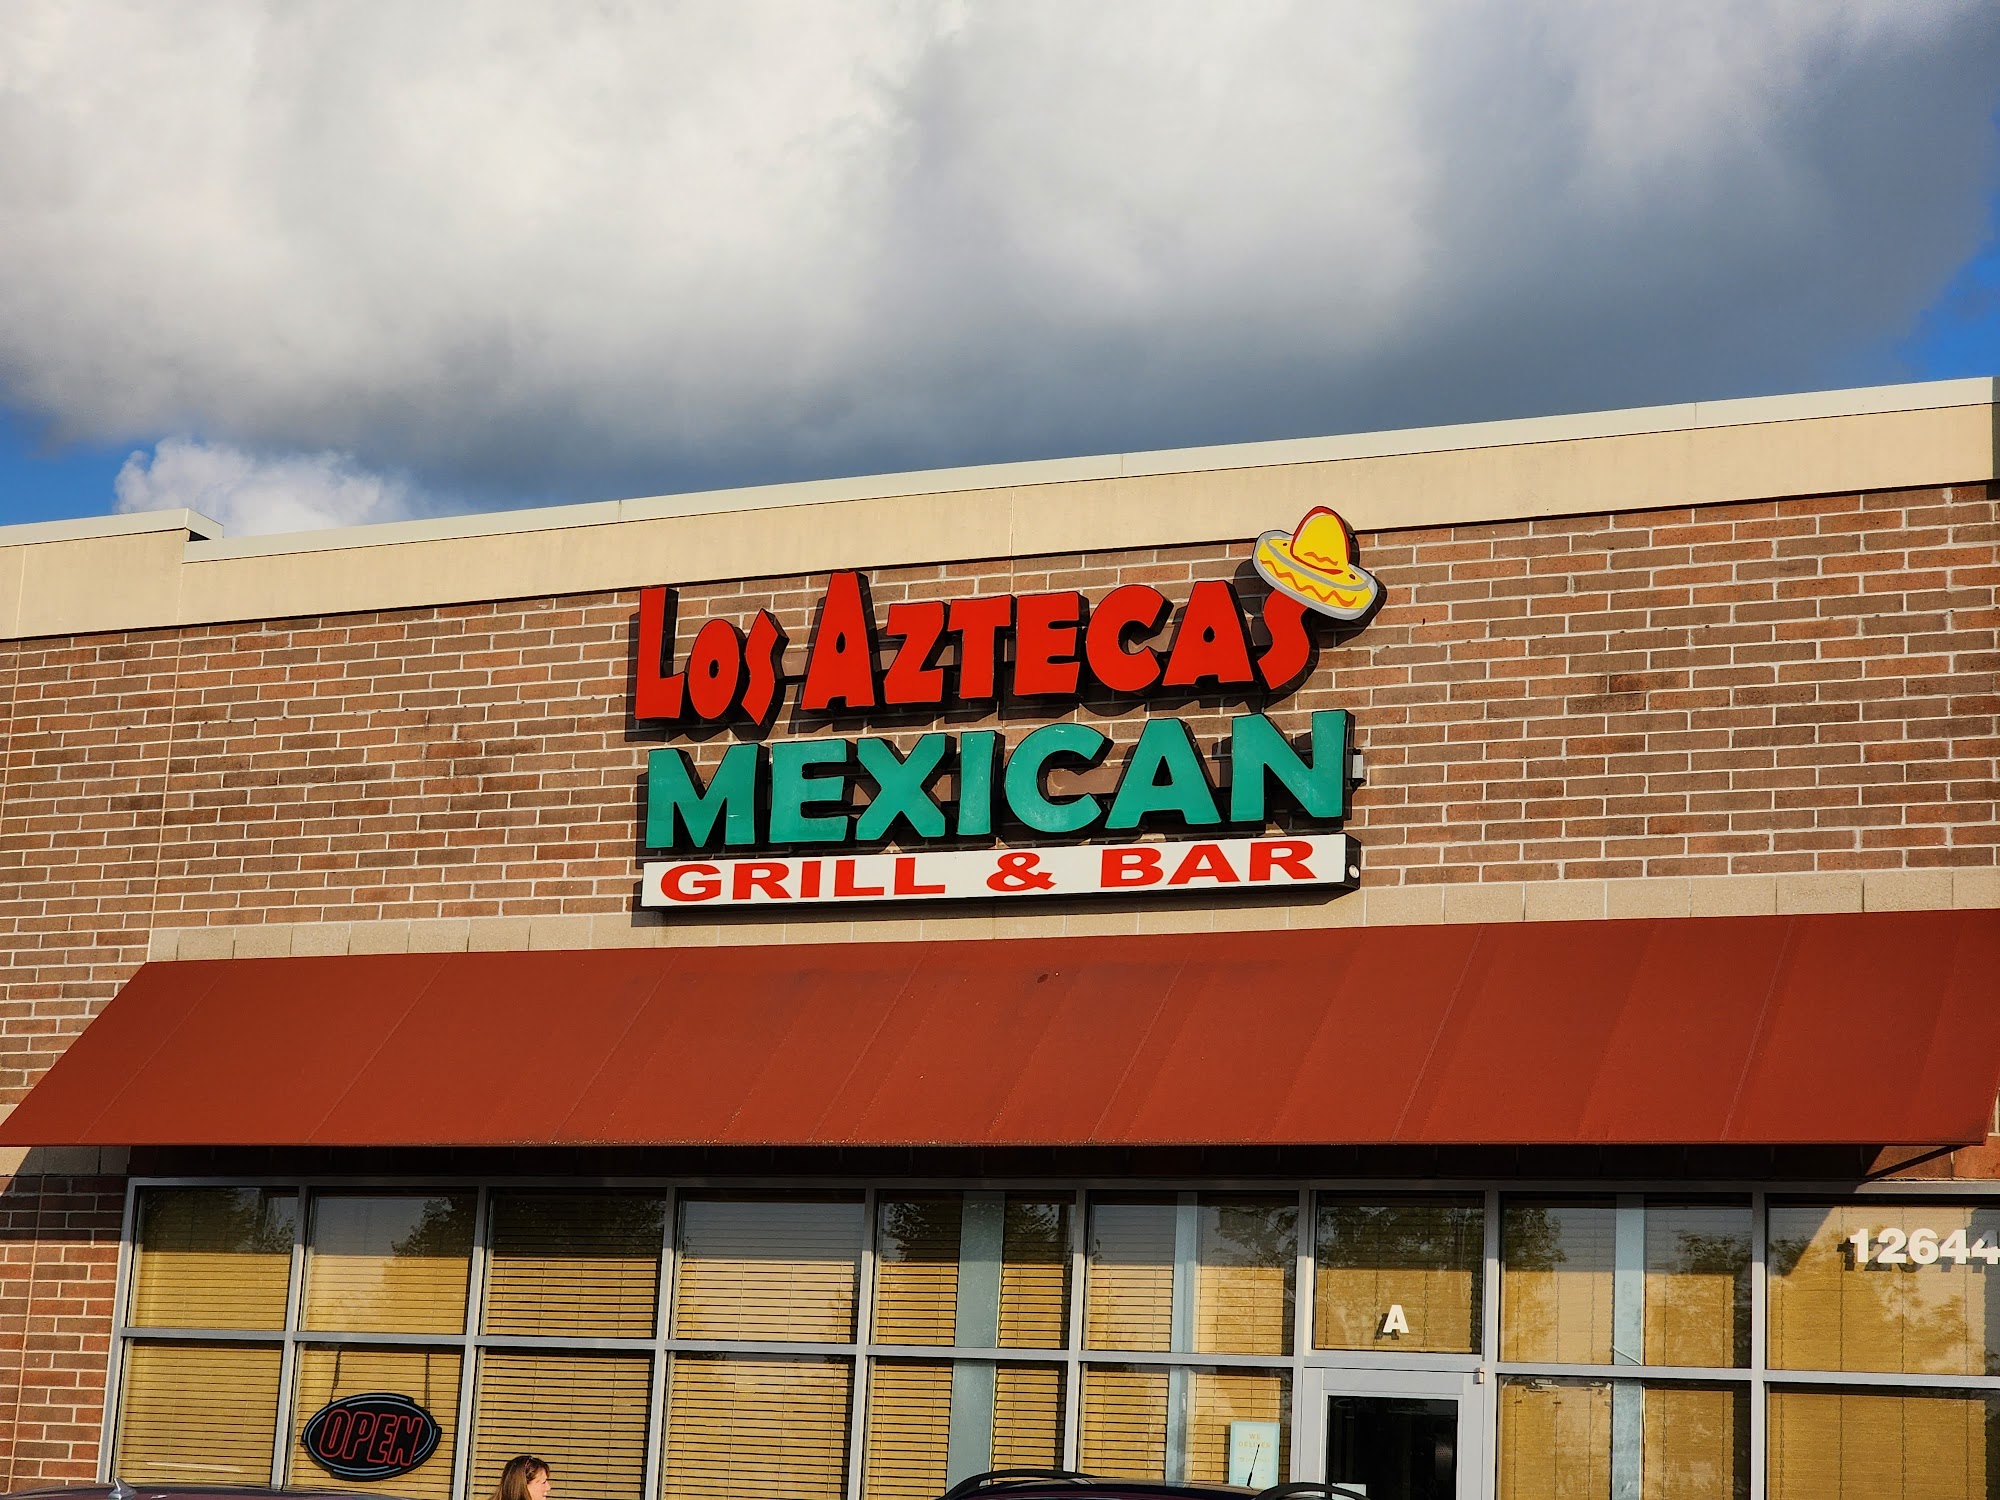 Los Aztecas mexican restaurant and cantina